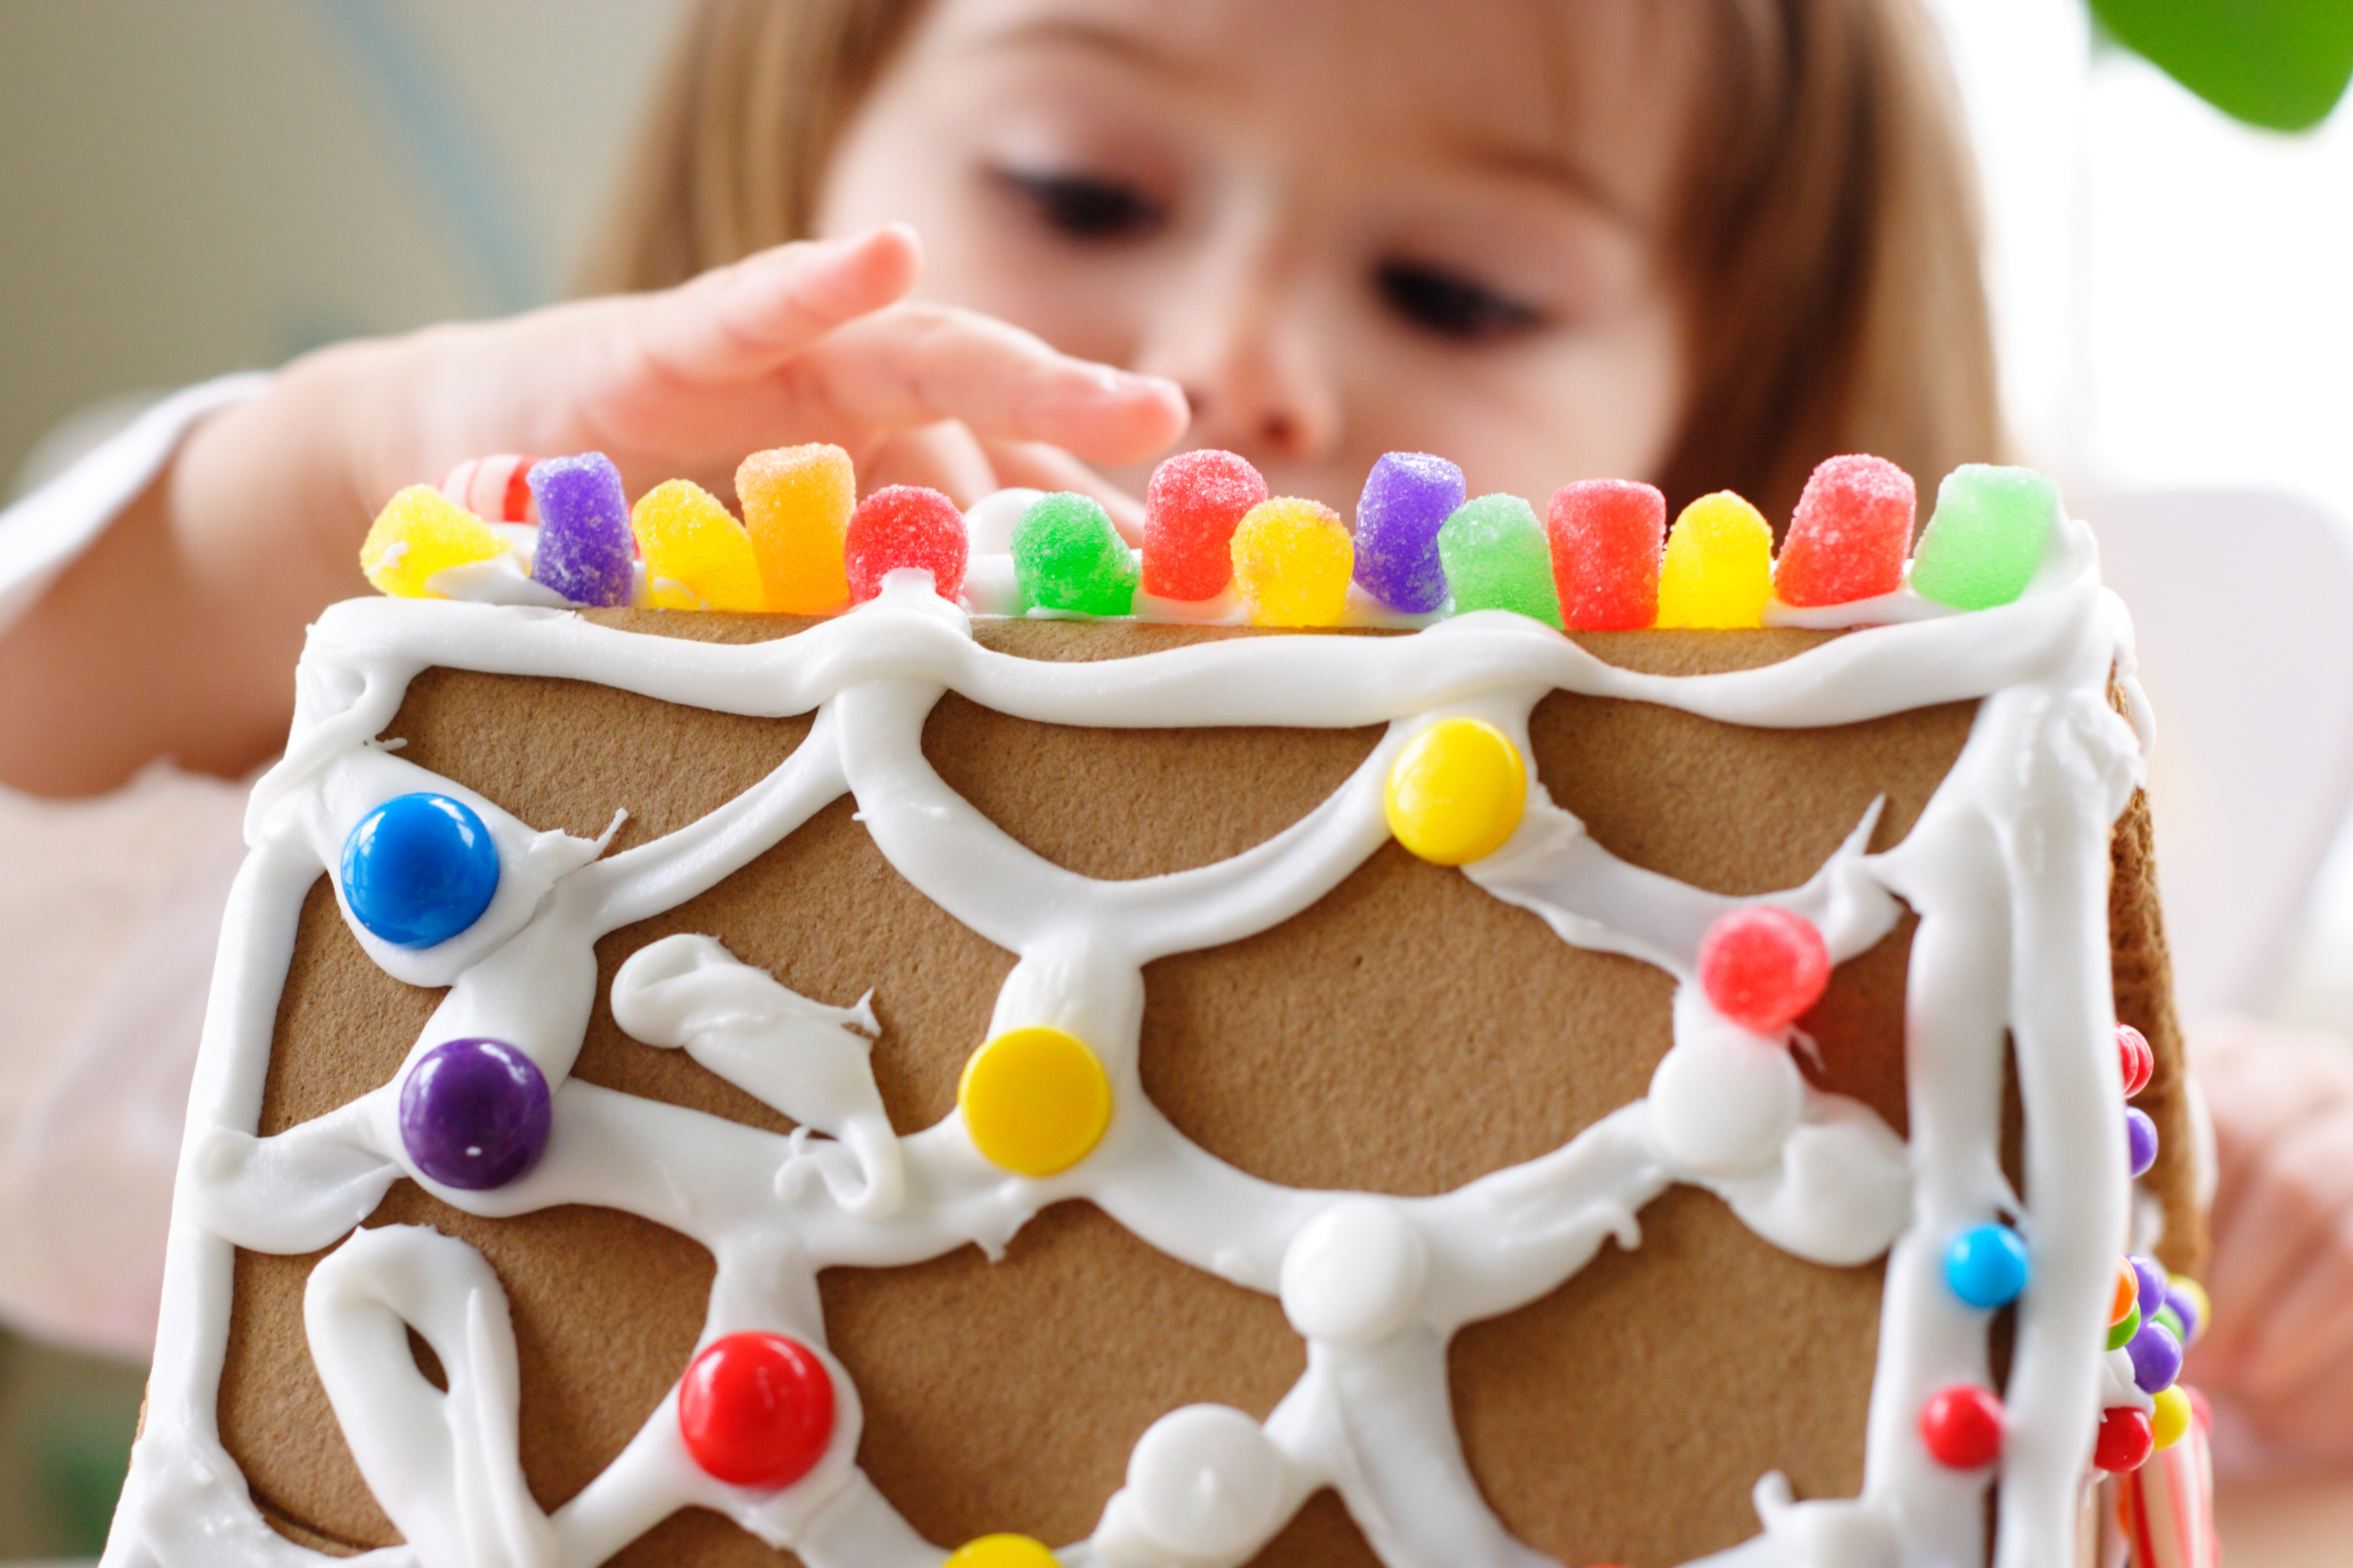 Child decorating gingerbread house